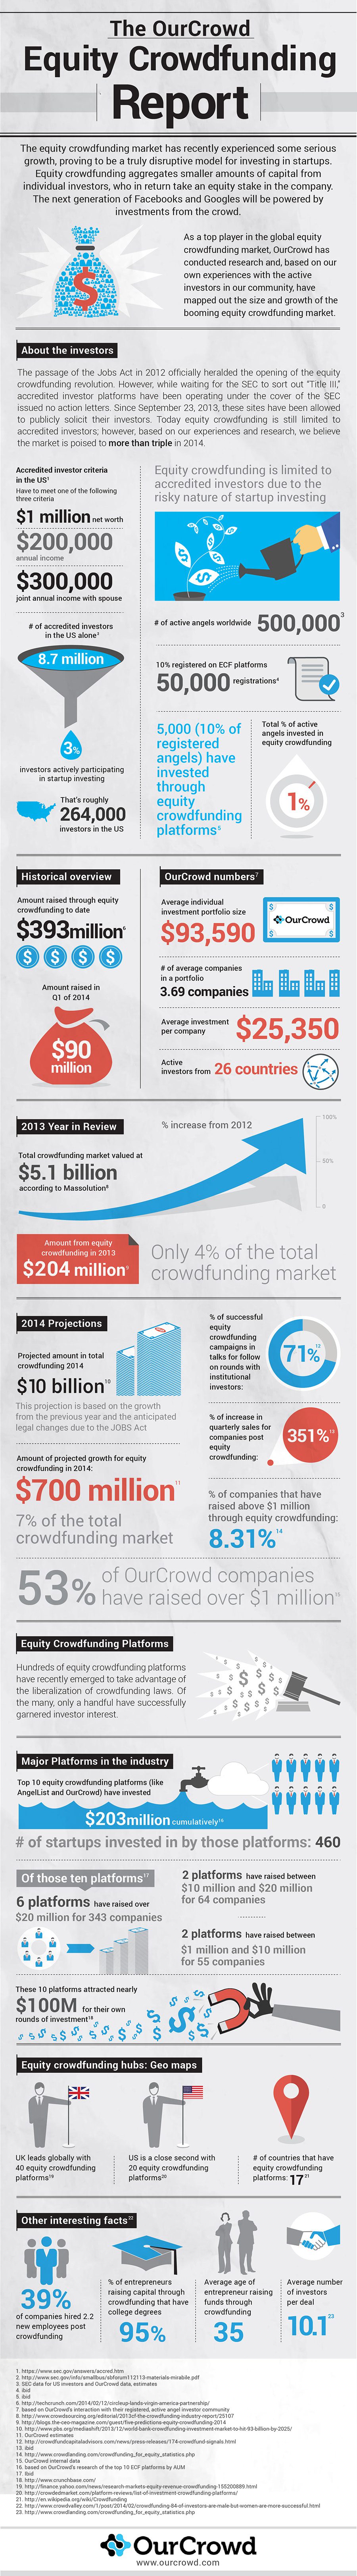 Equity Crowdfunding Facts